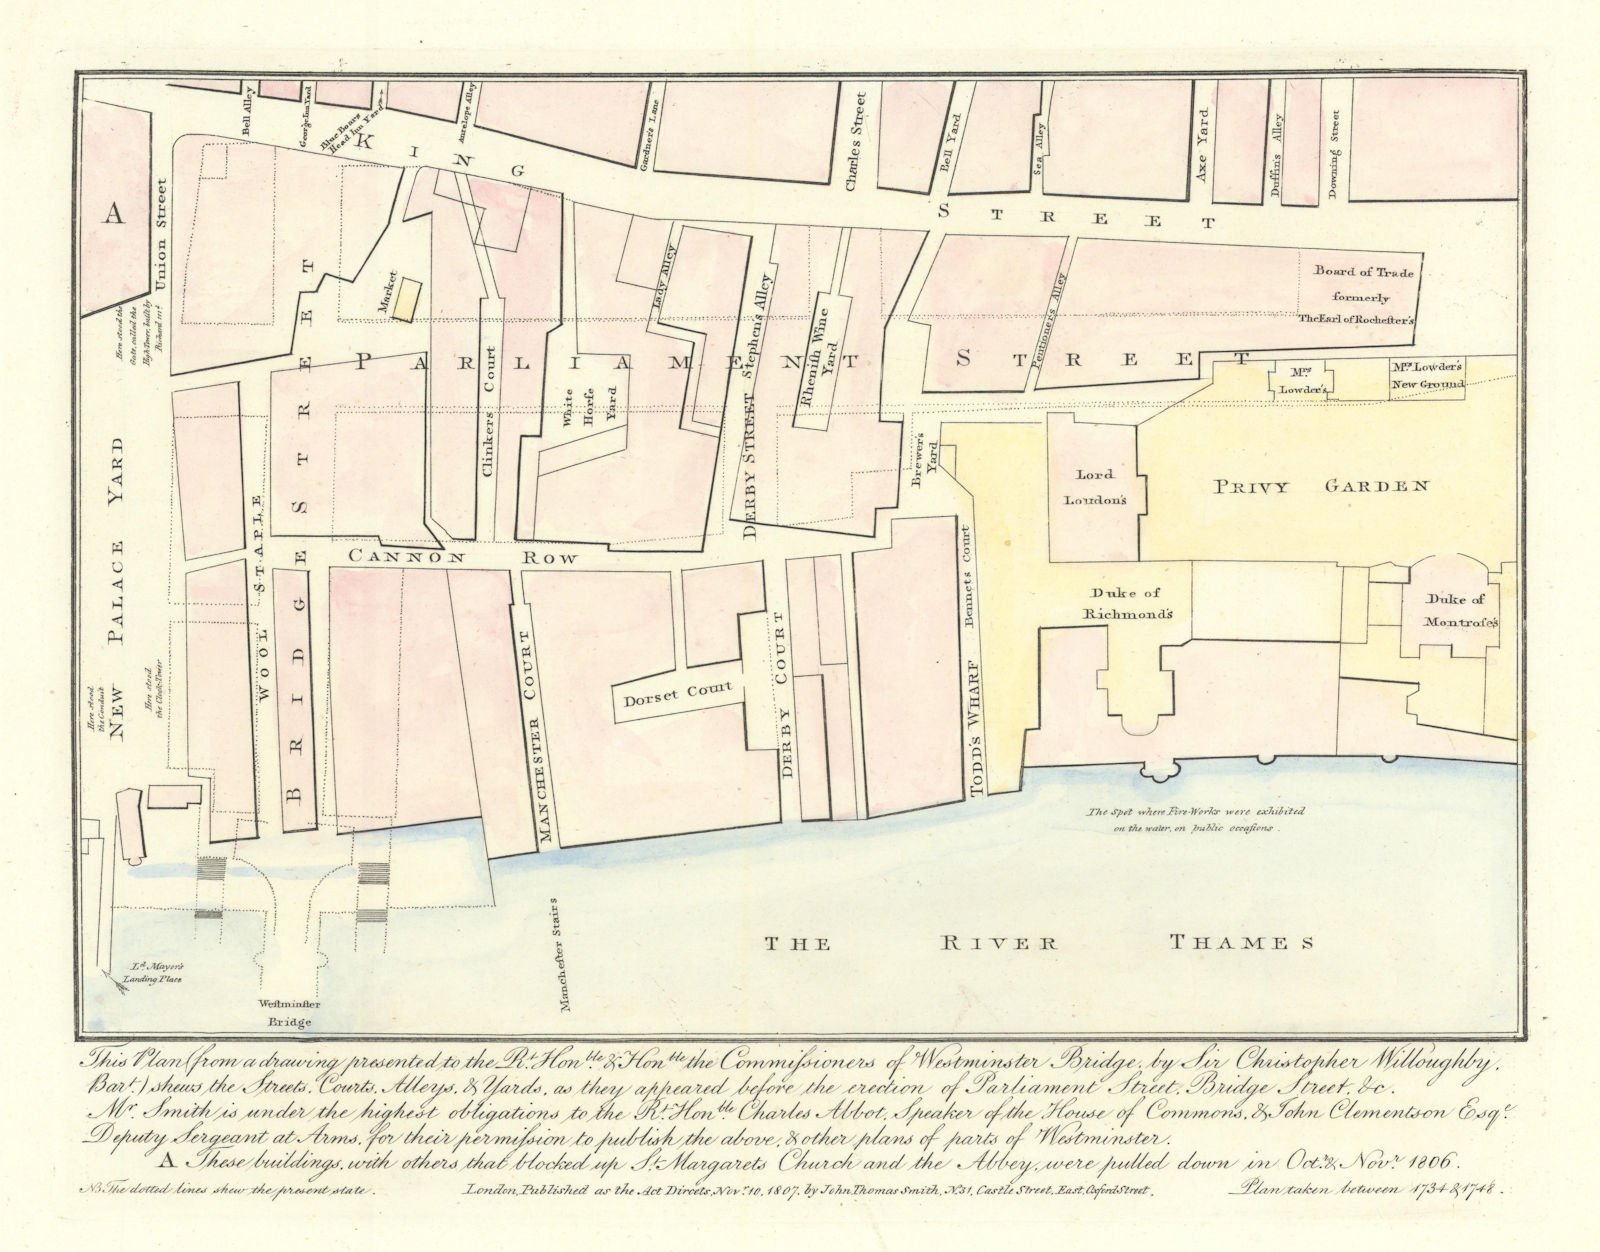 Westminster in 1734 before Parliament & Bridge Streets. J.T. SMITH 1807 map